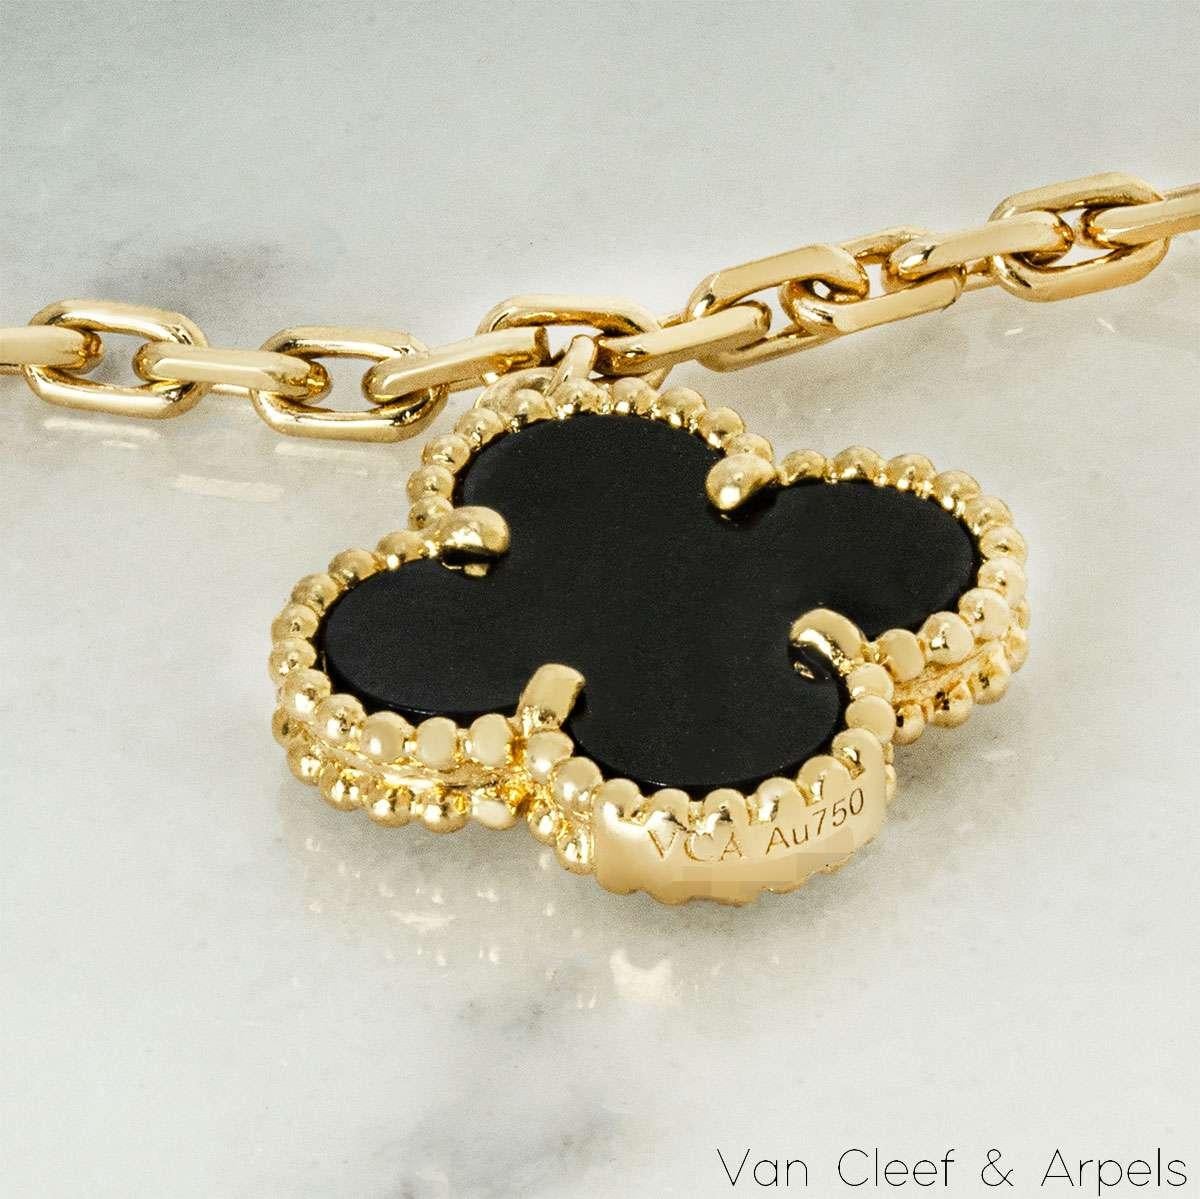 Van Cleef & Arpels Yellow Gold Mother of Pearl & Onyx Magic Alhambra Bracelet VC 3